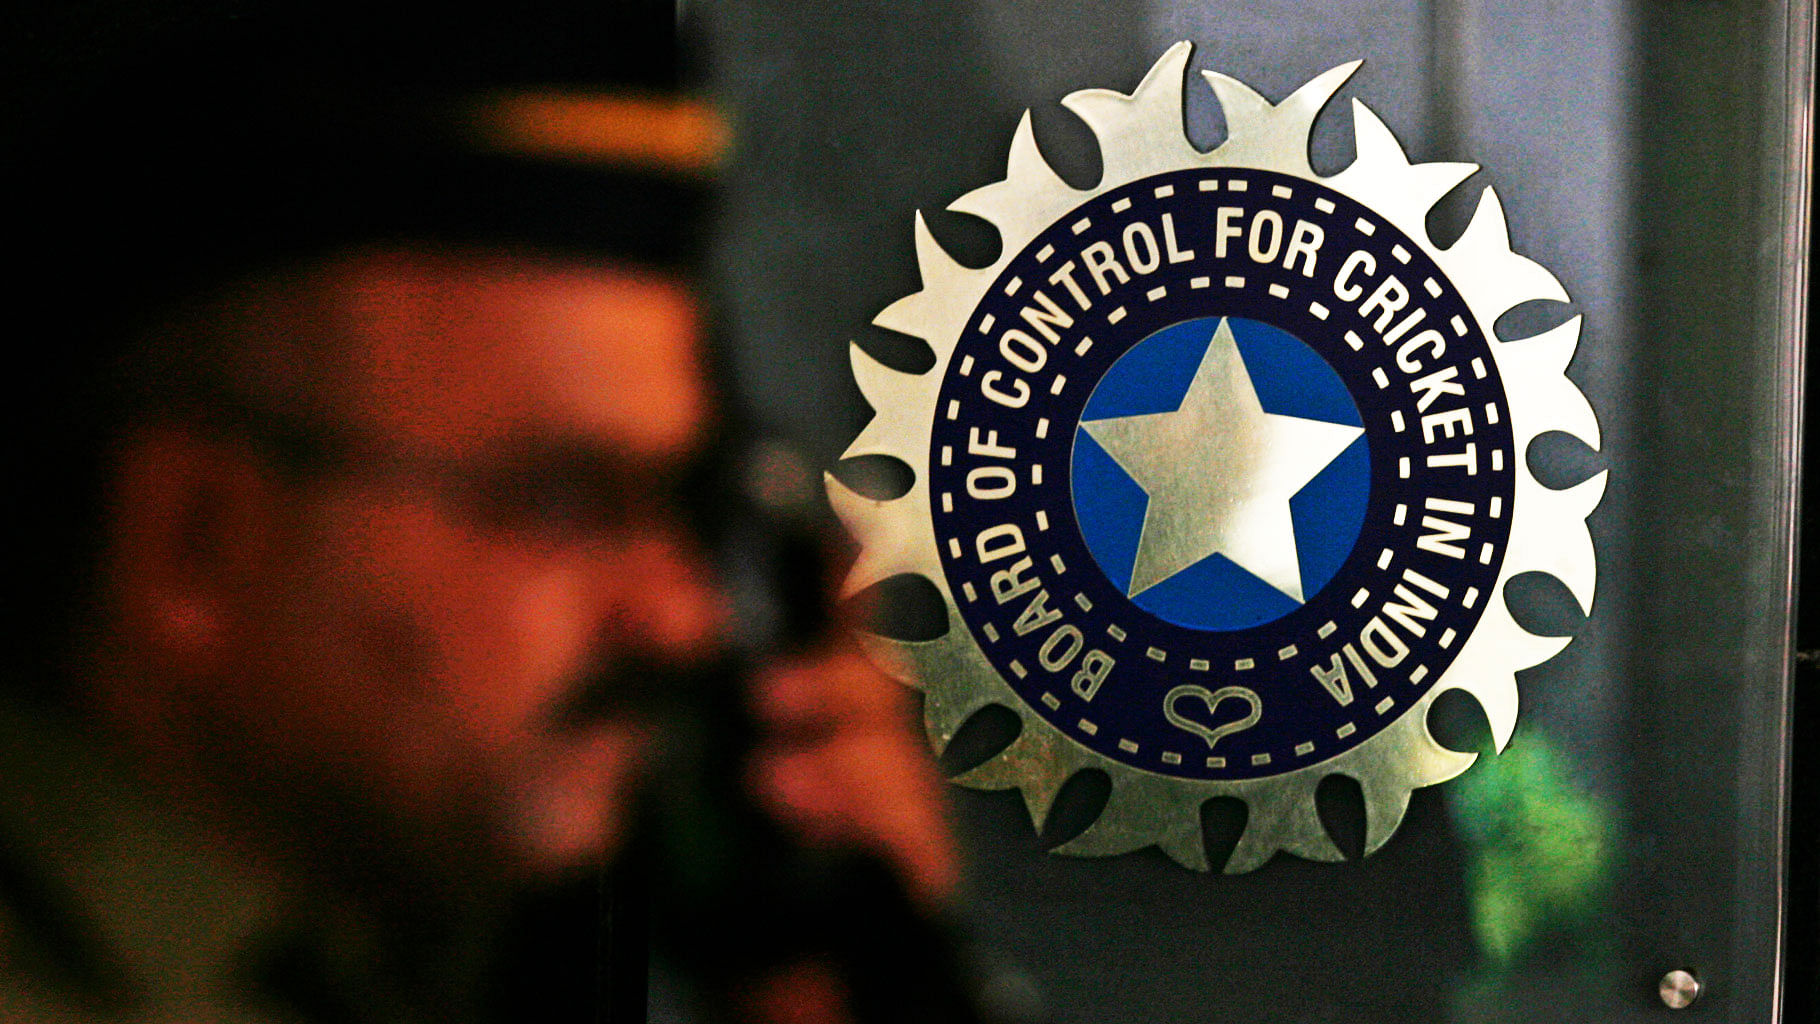 The Department of Revenue has issued a notice for tax evasion to the Board of Control for Cricket in India (BCCI).